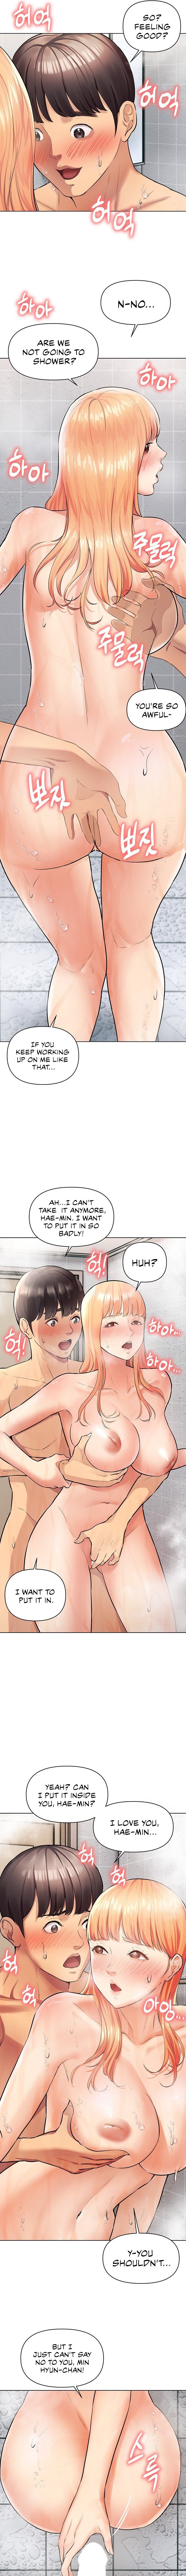 the-girls-i-couldnt-date-before-chap-9-1